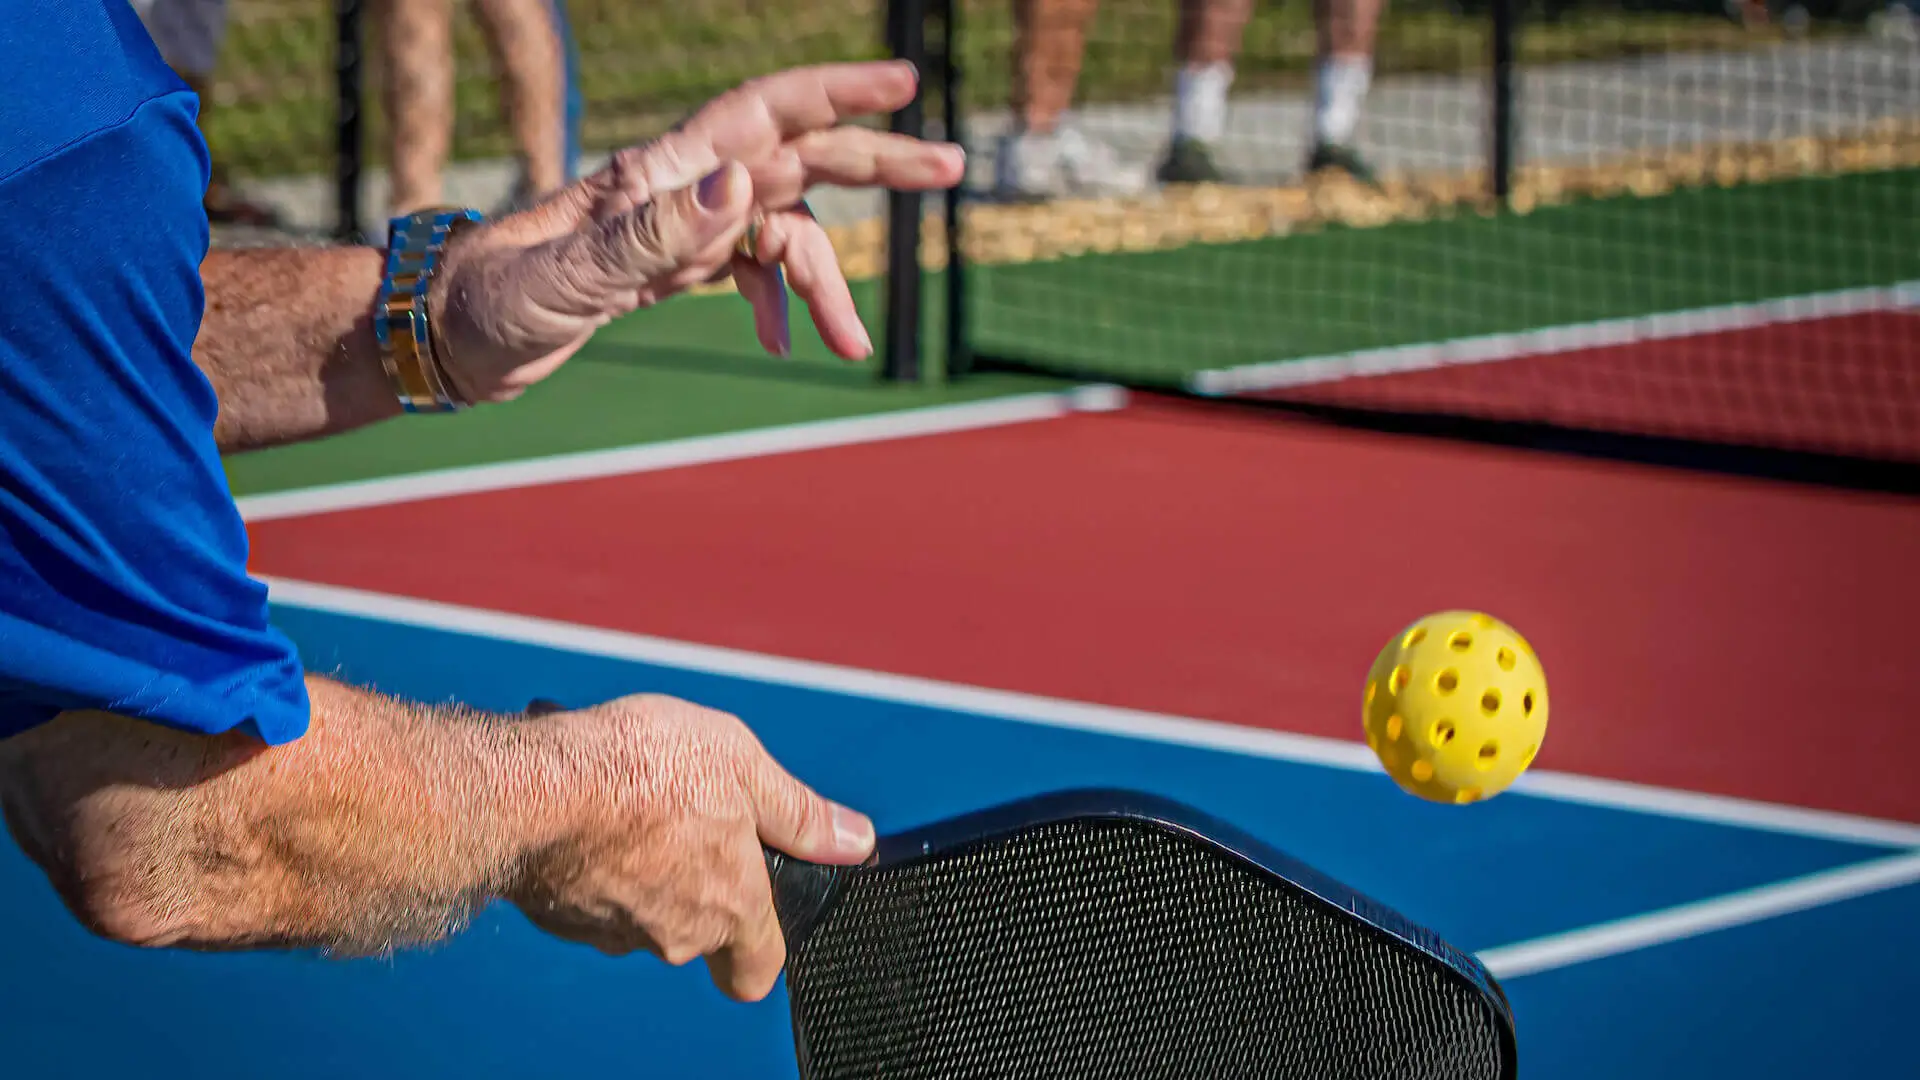 Over the shoulder shot of man hitting a pickleball with a paddle